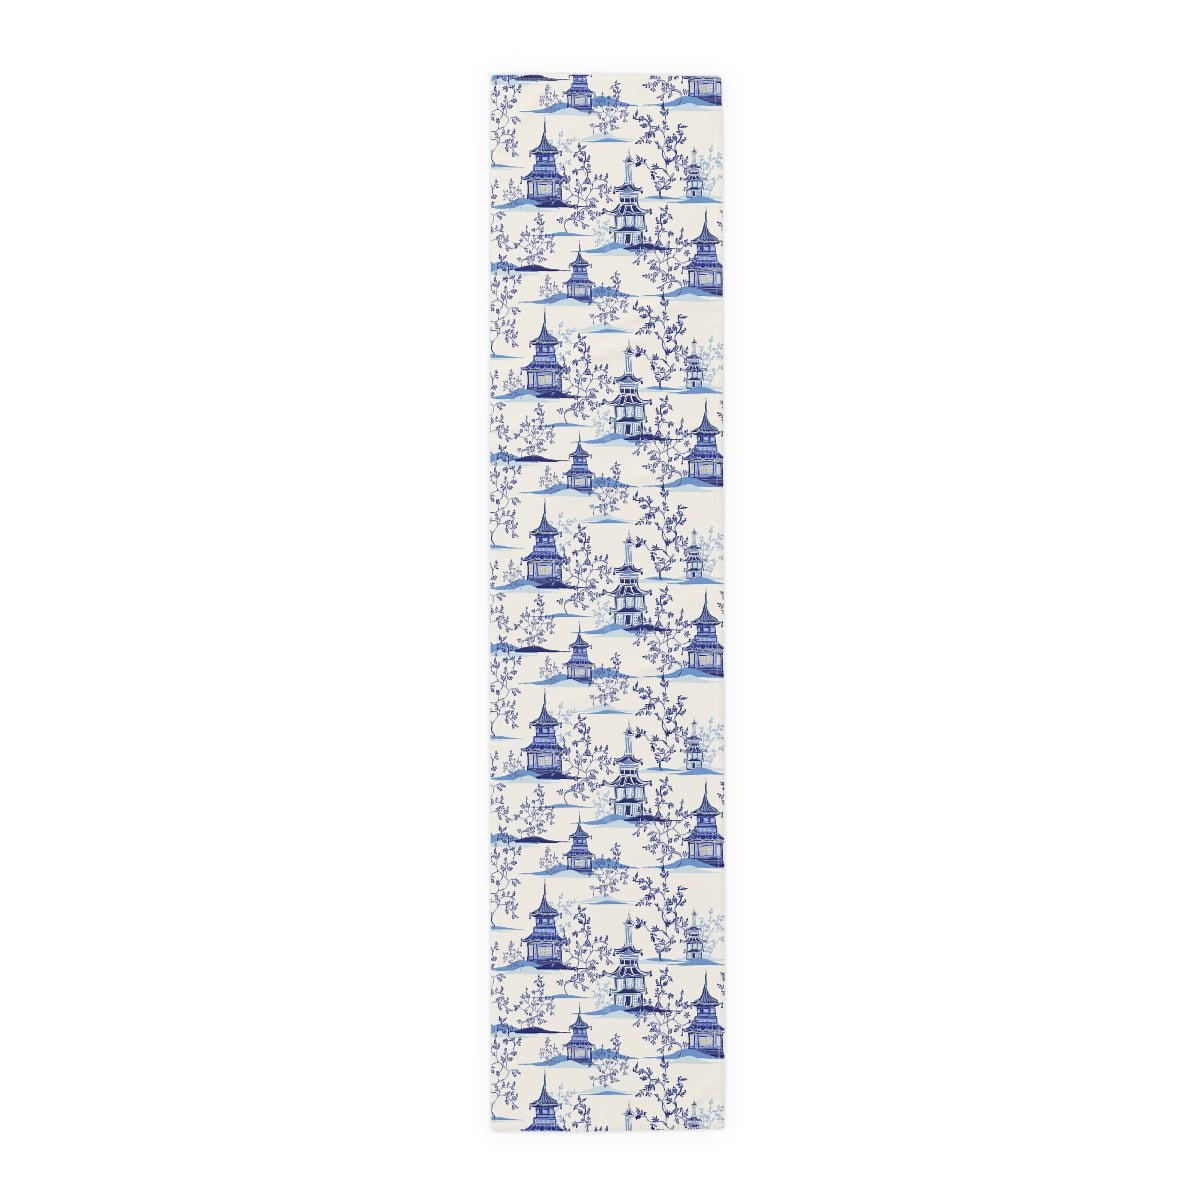 Chinoiserie Vintage Chinese Pagodas Table Runner - Puffin Lime